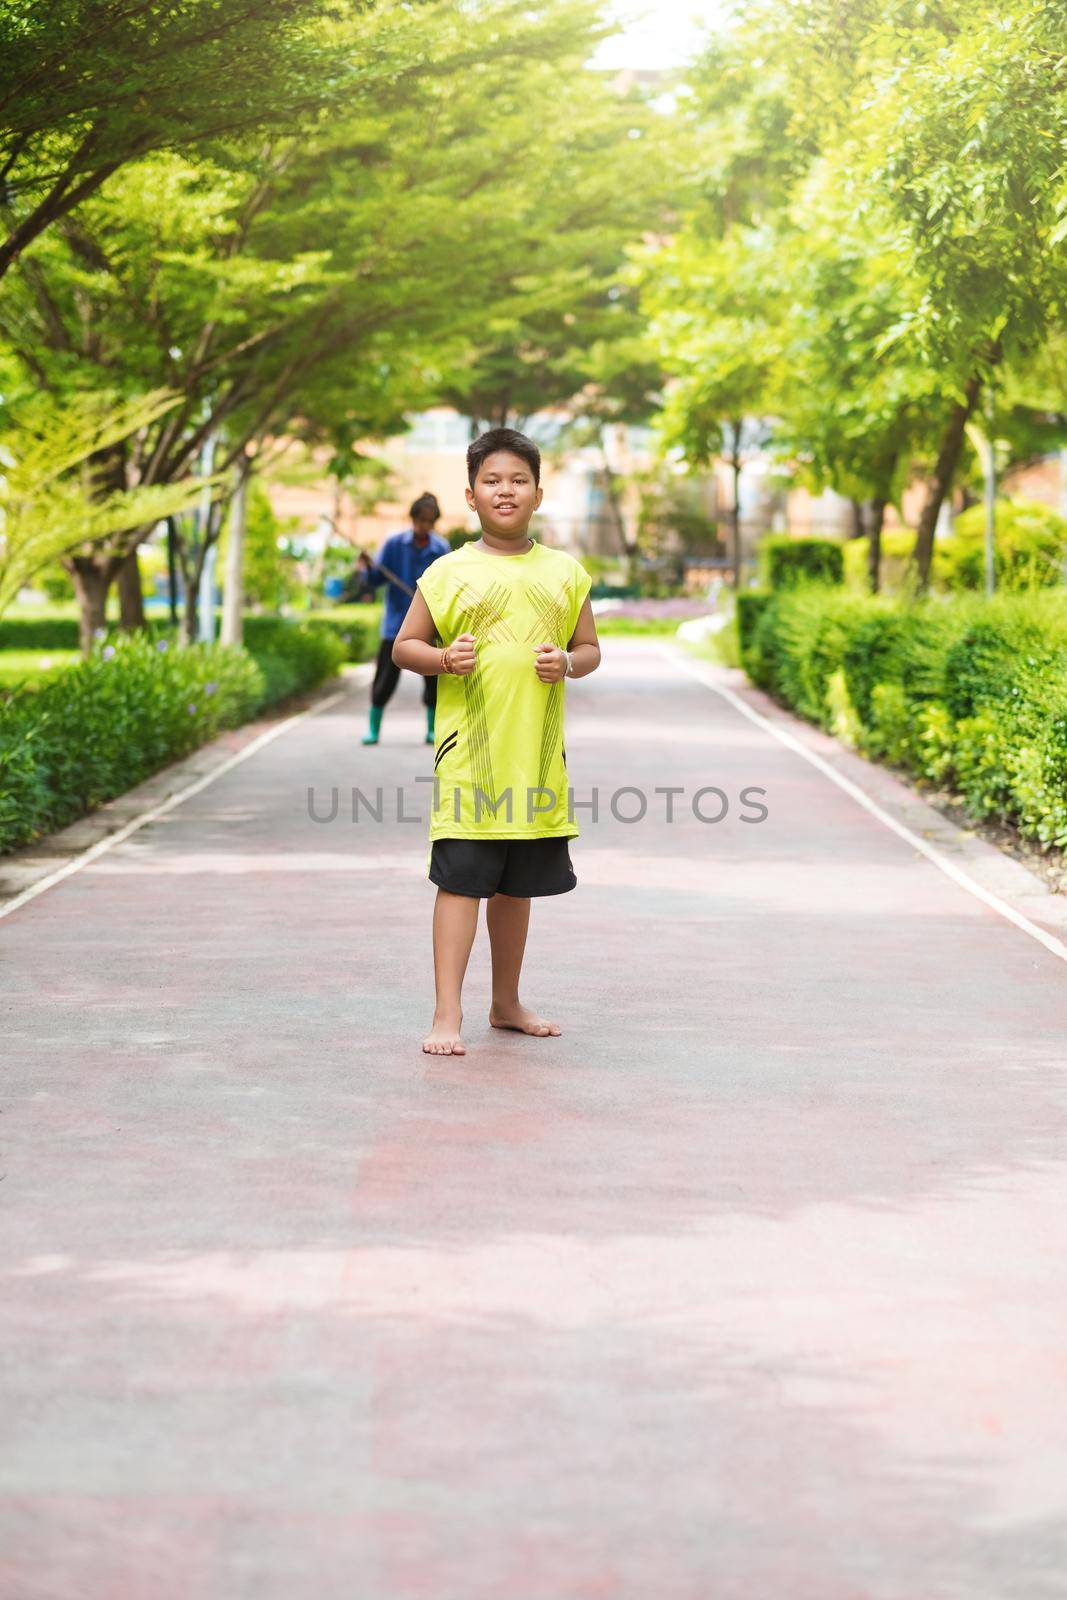 Asian man jogging at the park in sunny morning. by Benzoix